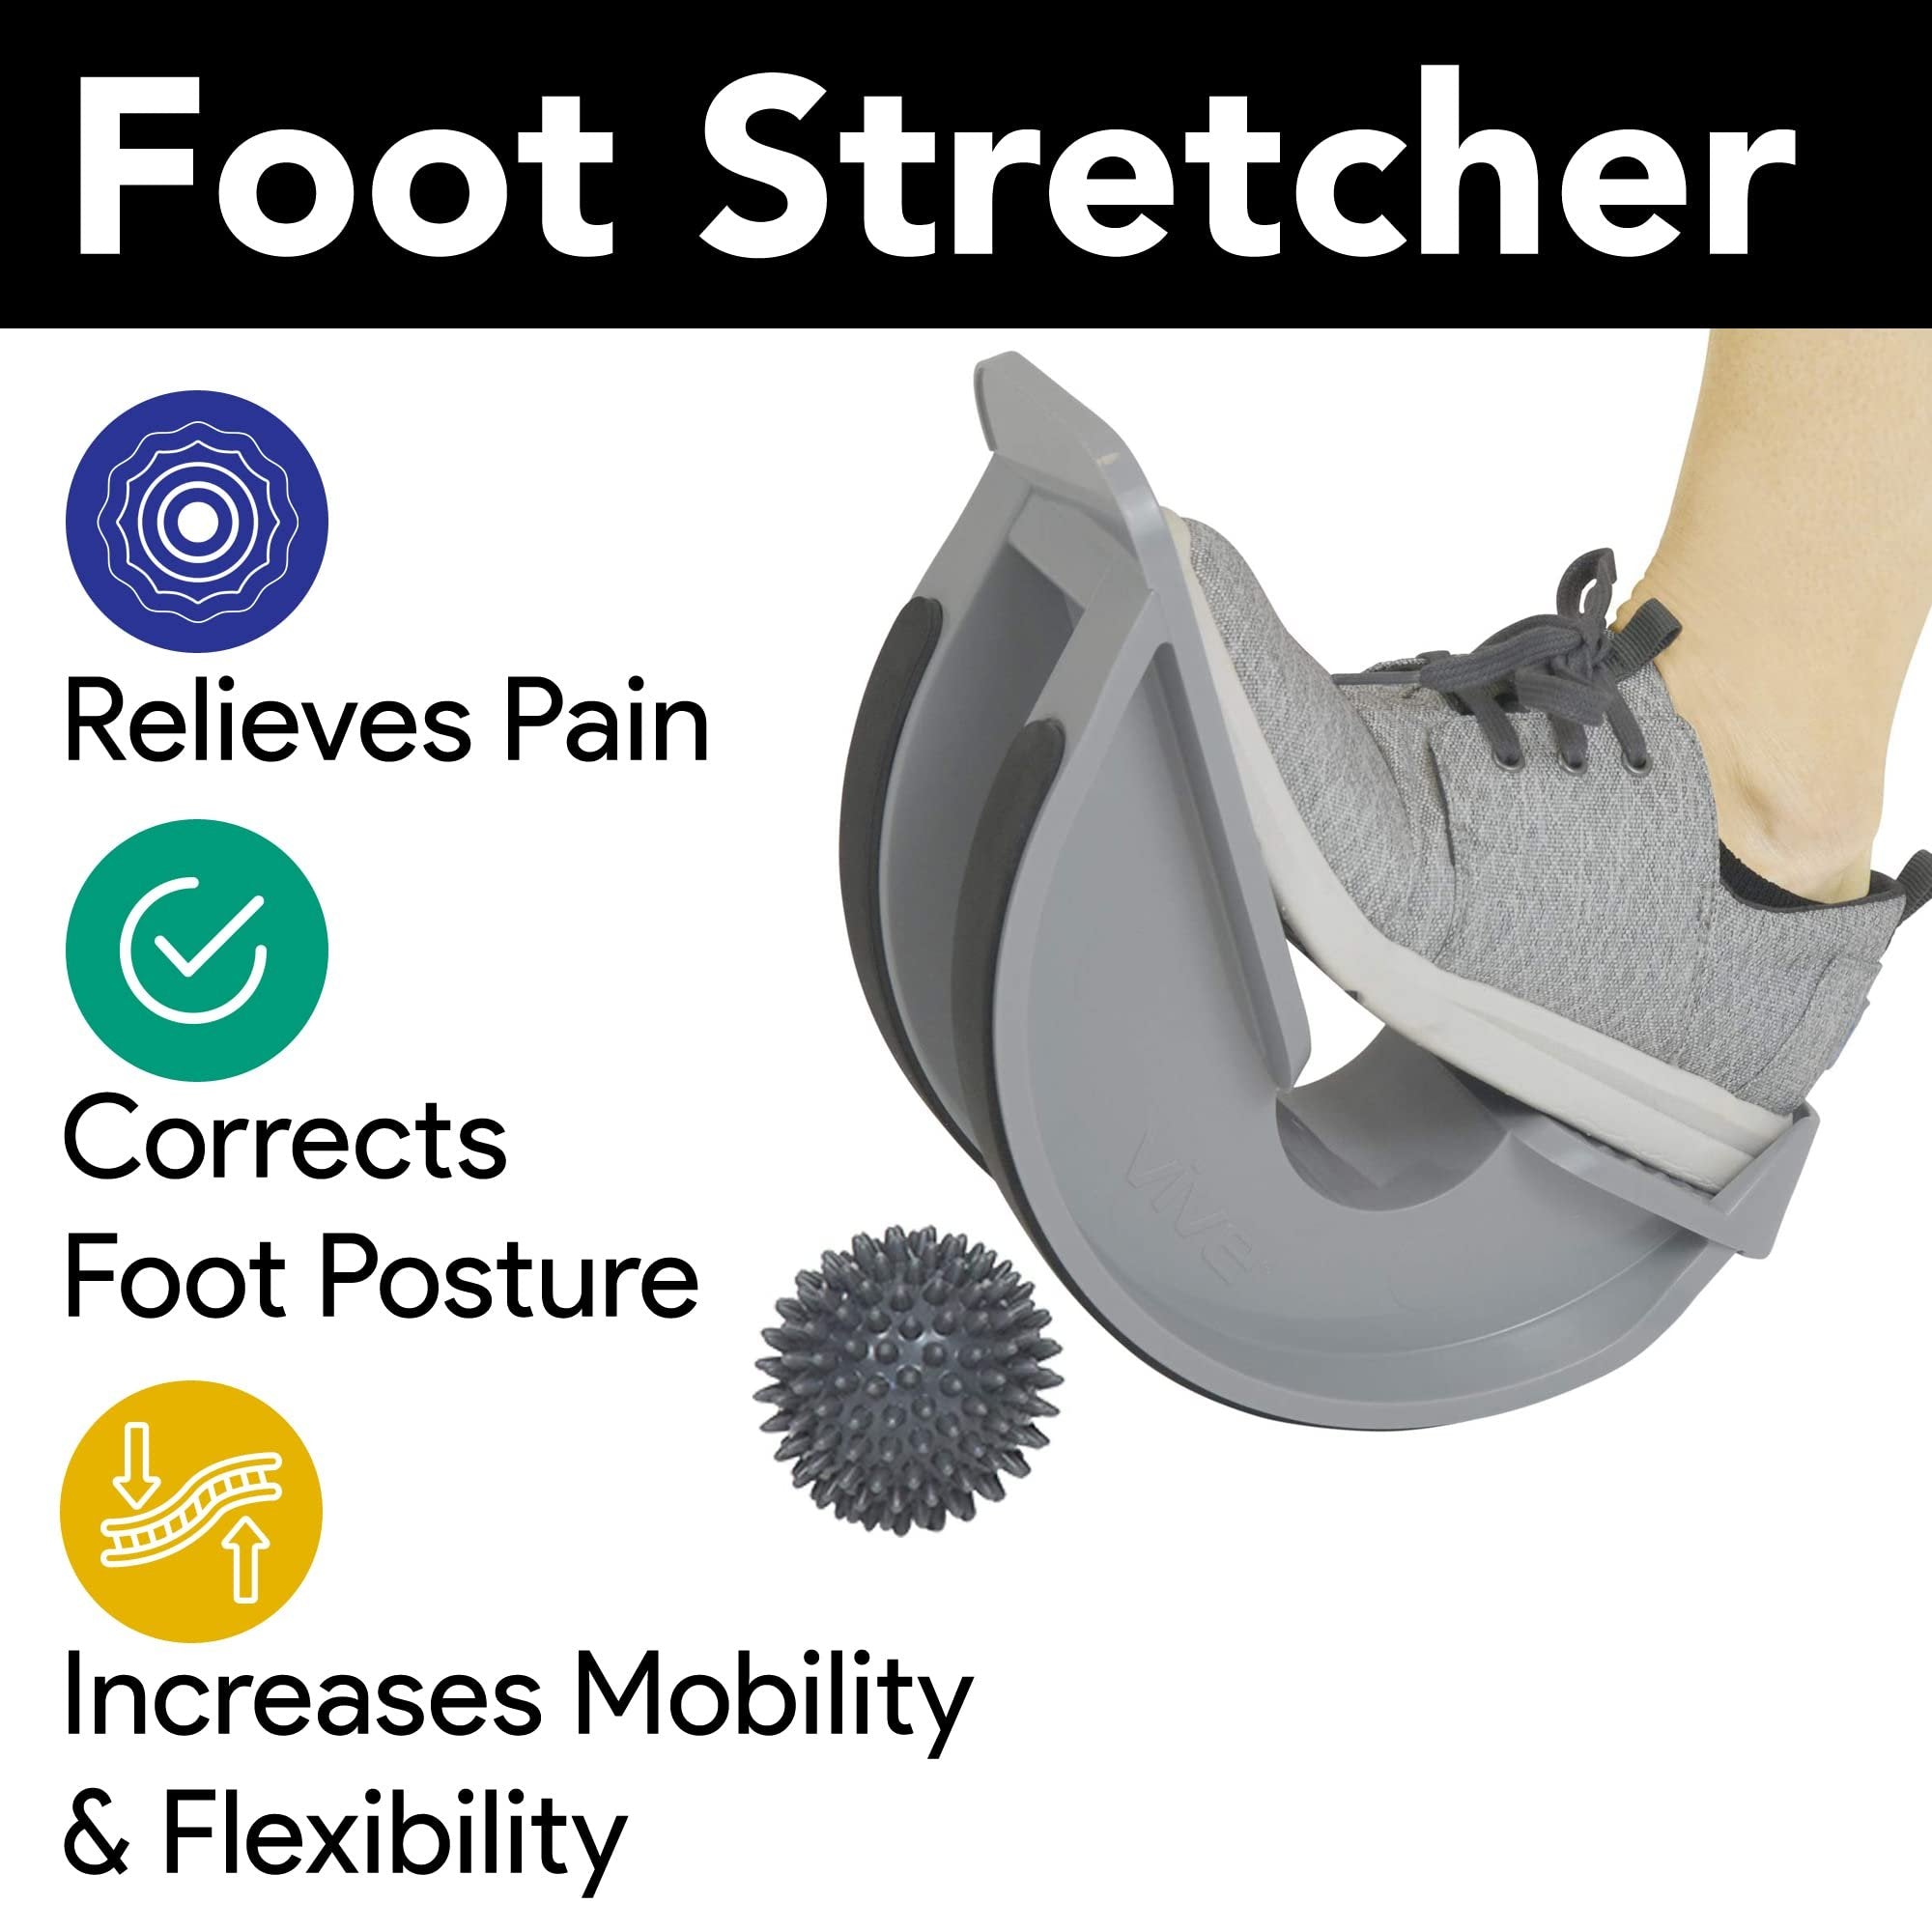 ProHeal Foot Rocker Calf Stretcher with Spiked Ball Massager - for Plantar Fasciitis, Achilles Tendonitis - Calf, Foot, Heel, and Ankle Stretcher - Lower Leg Pain Relief - Gray with Green Ball